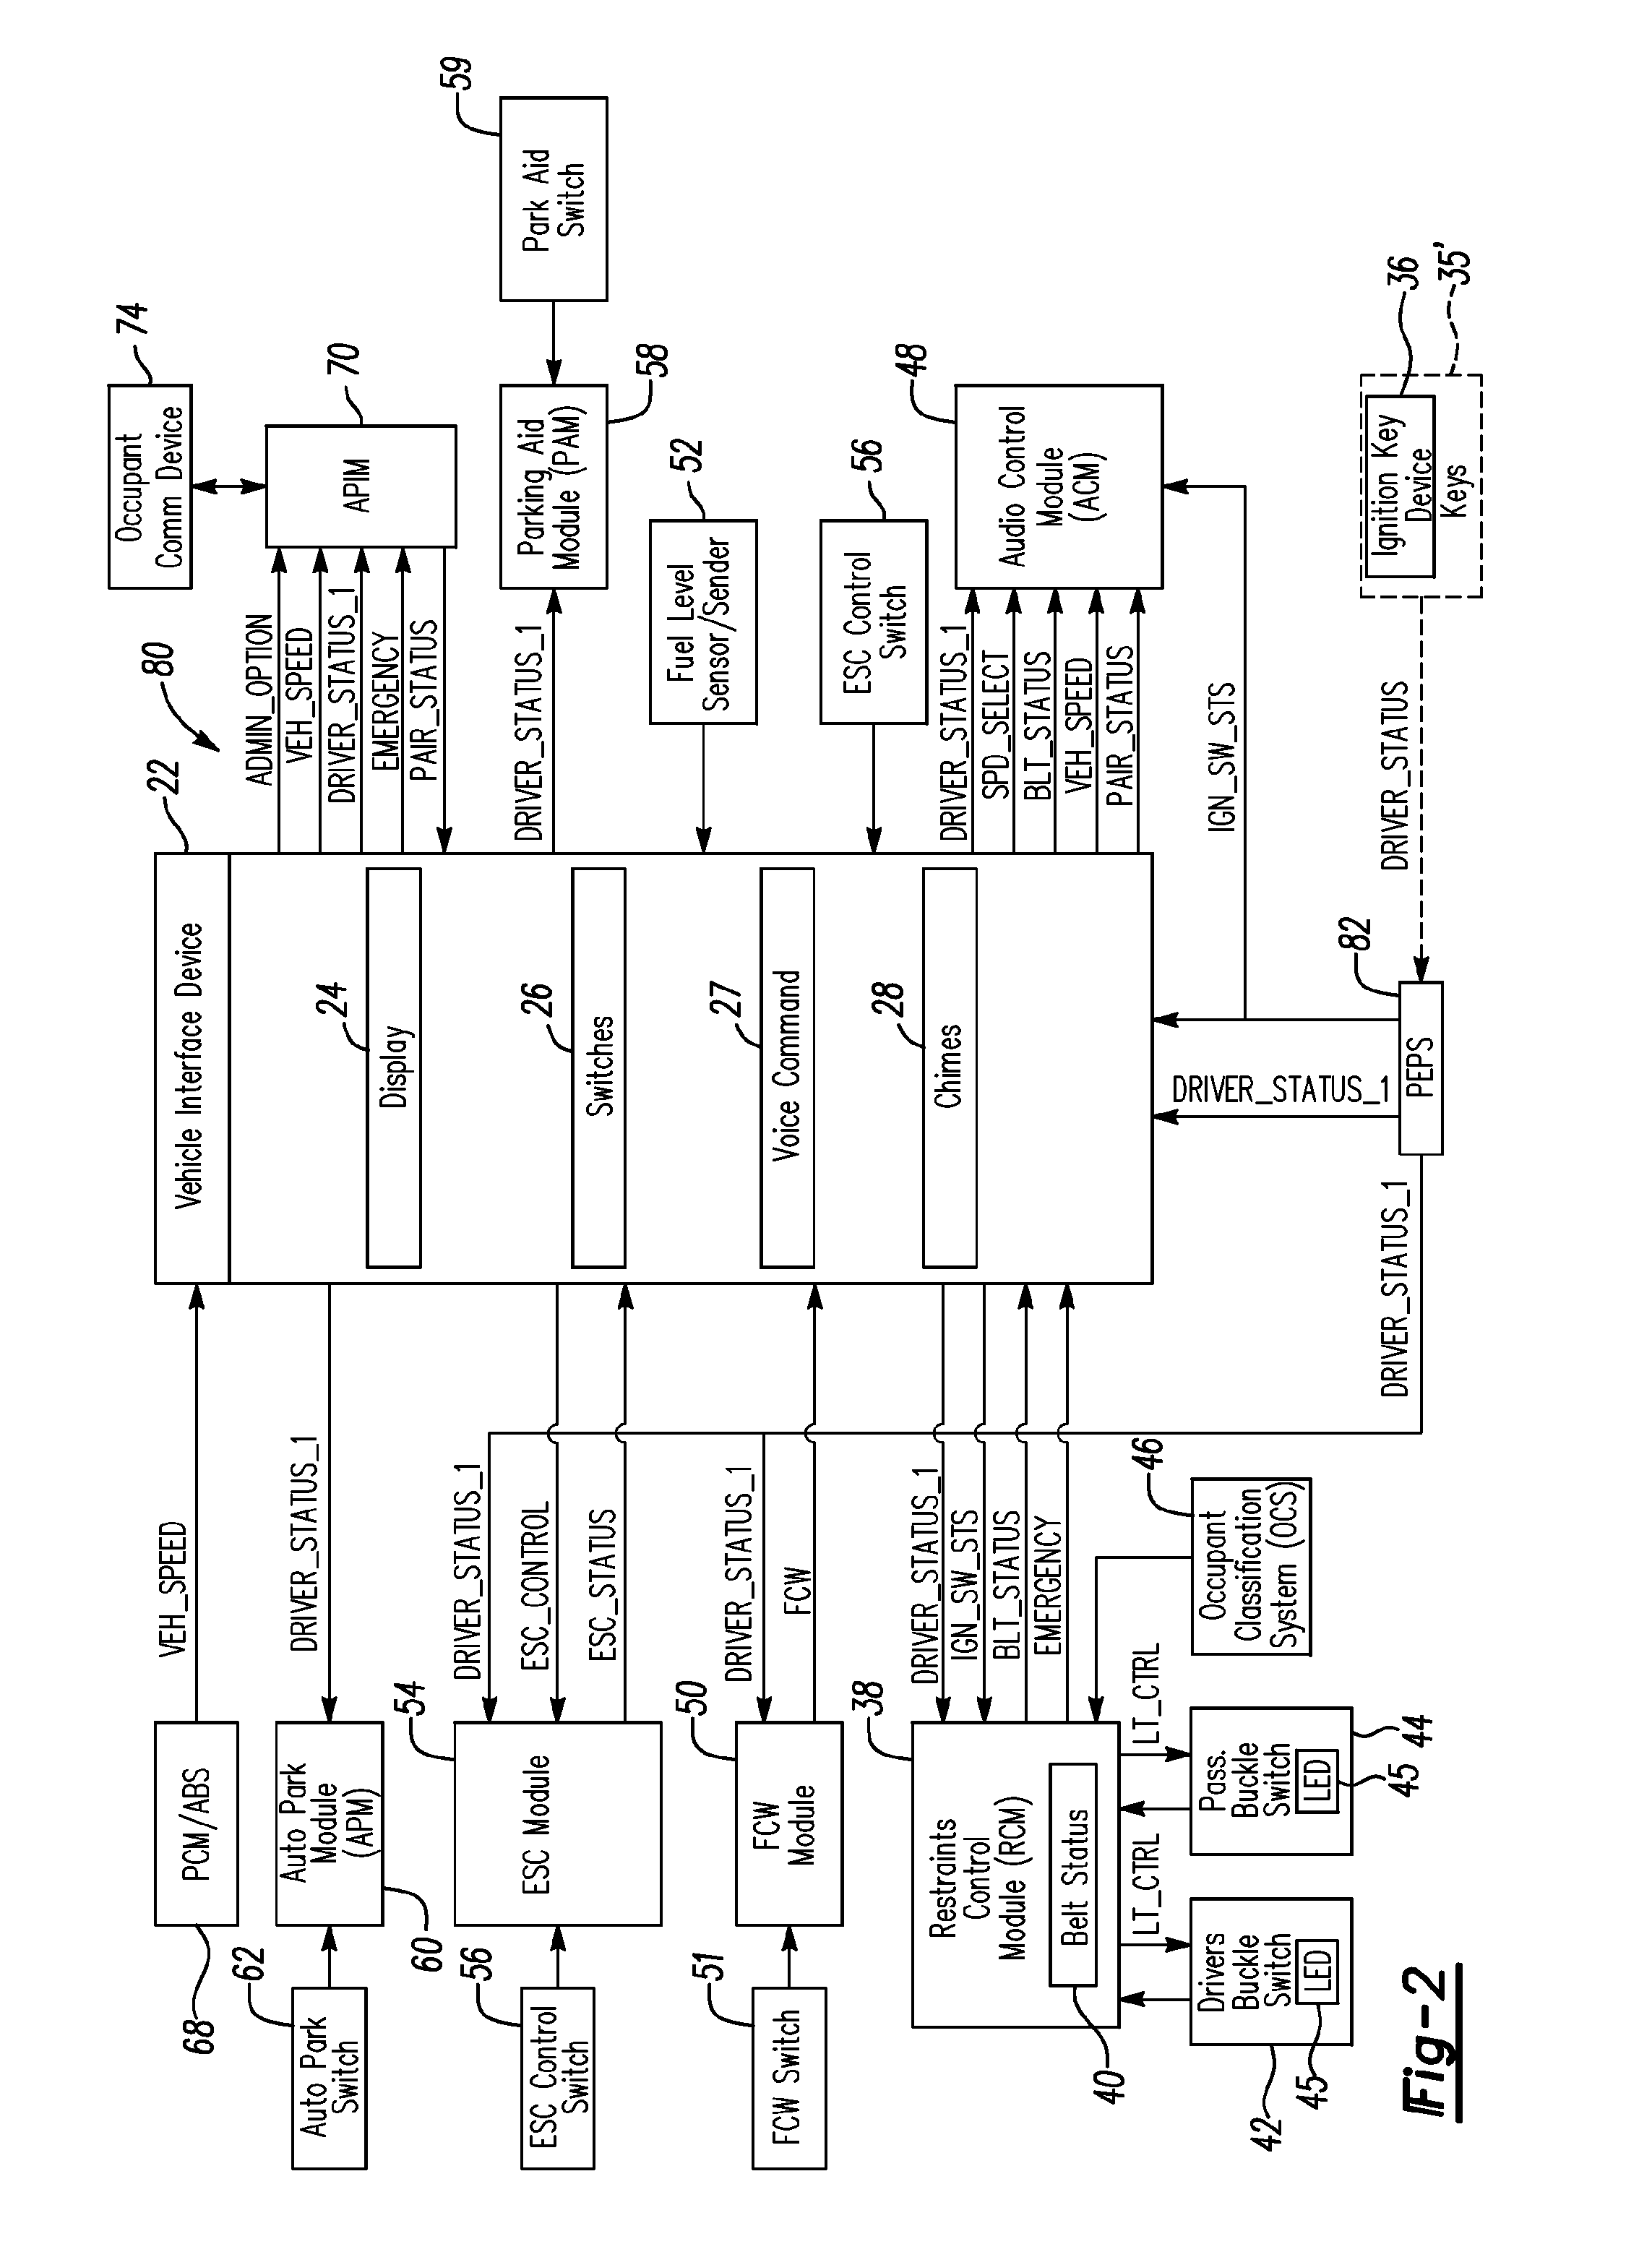 System and method for controlling an entertainment device in a vehicle based on driver status and a predetermined vehicle event